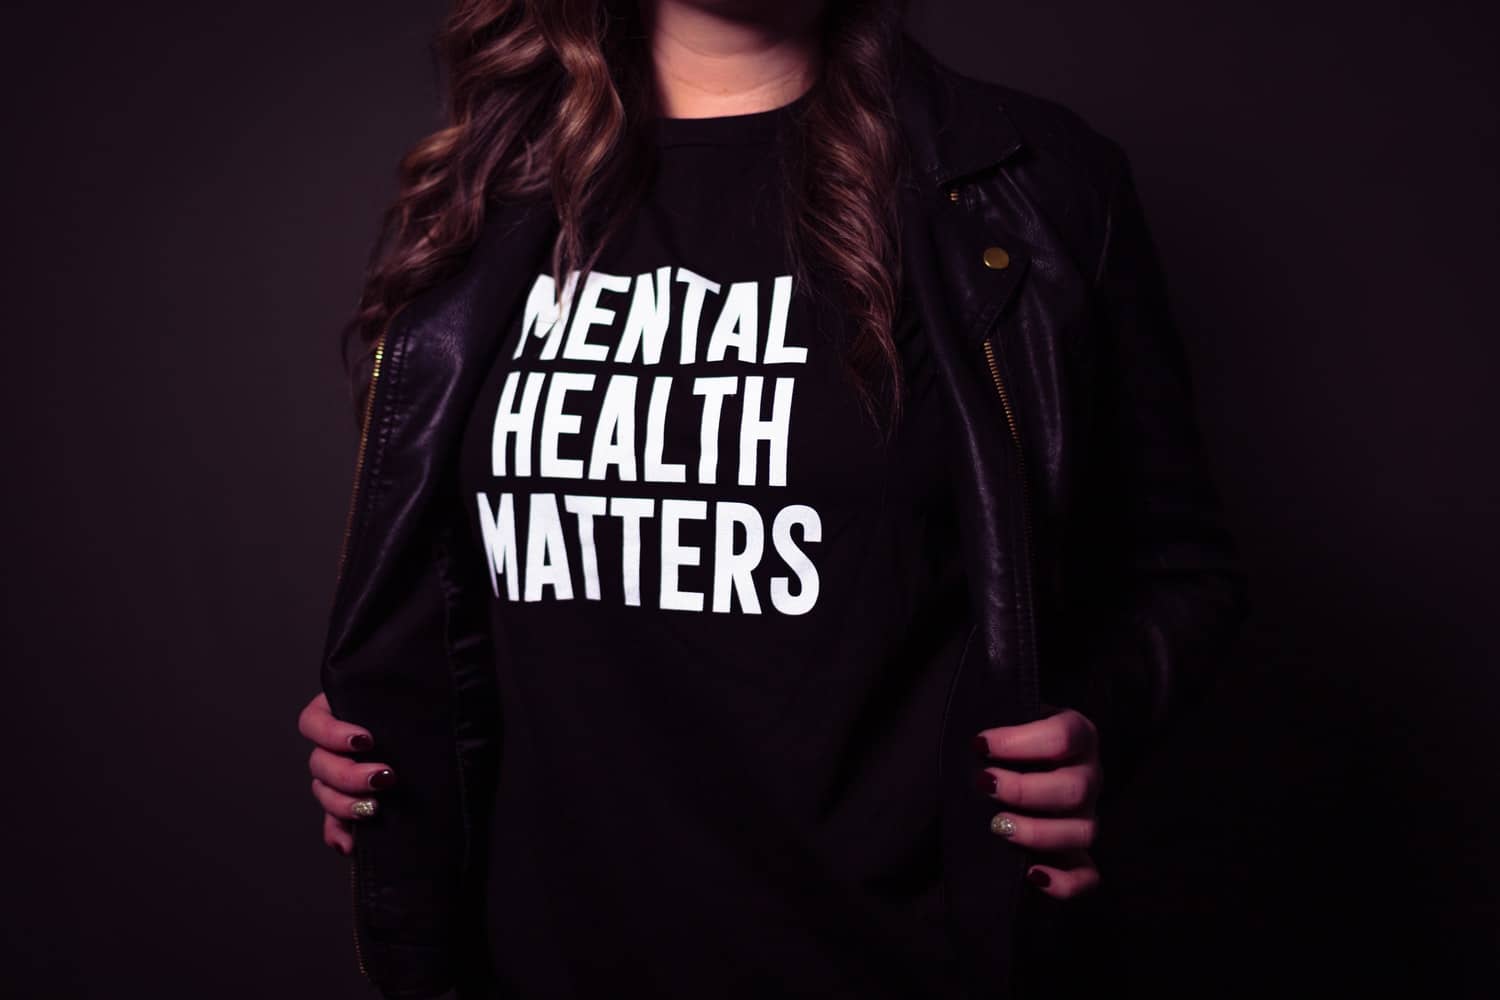 Woman showing mental health matters on her t-shirt